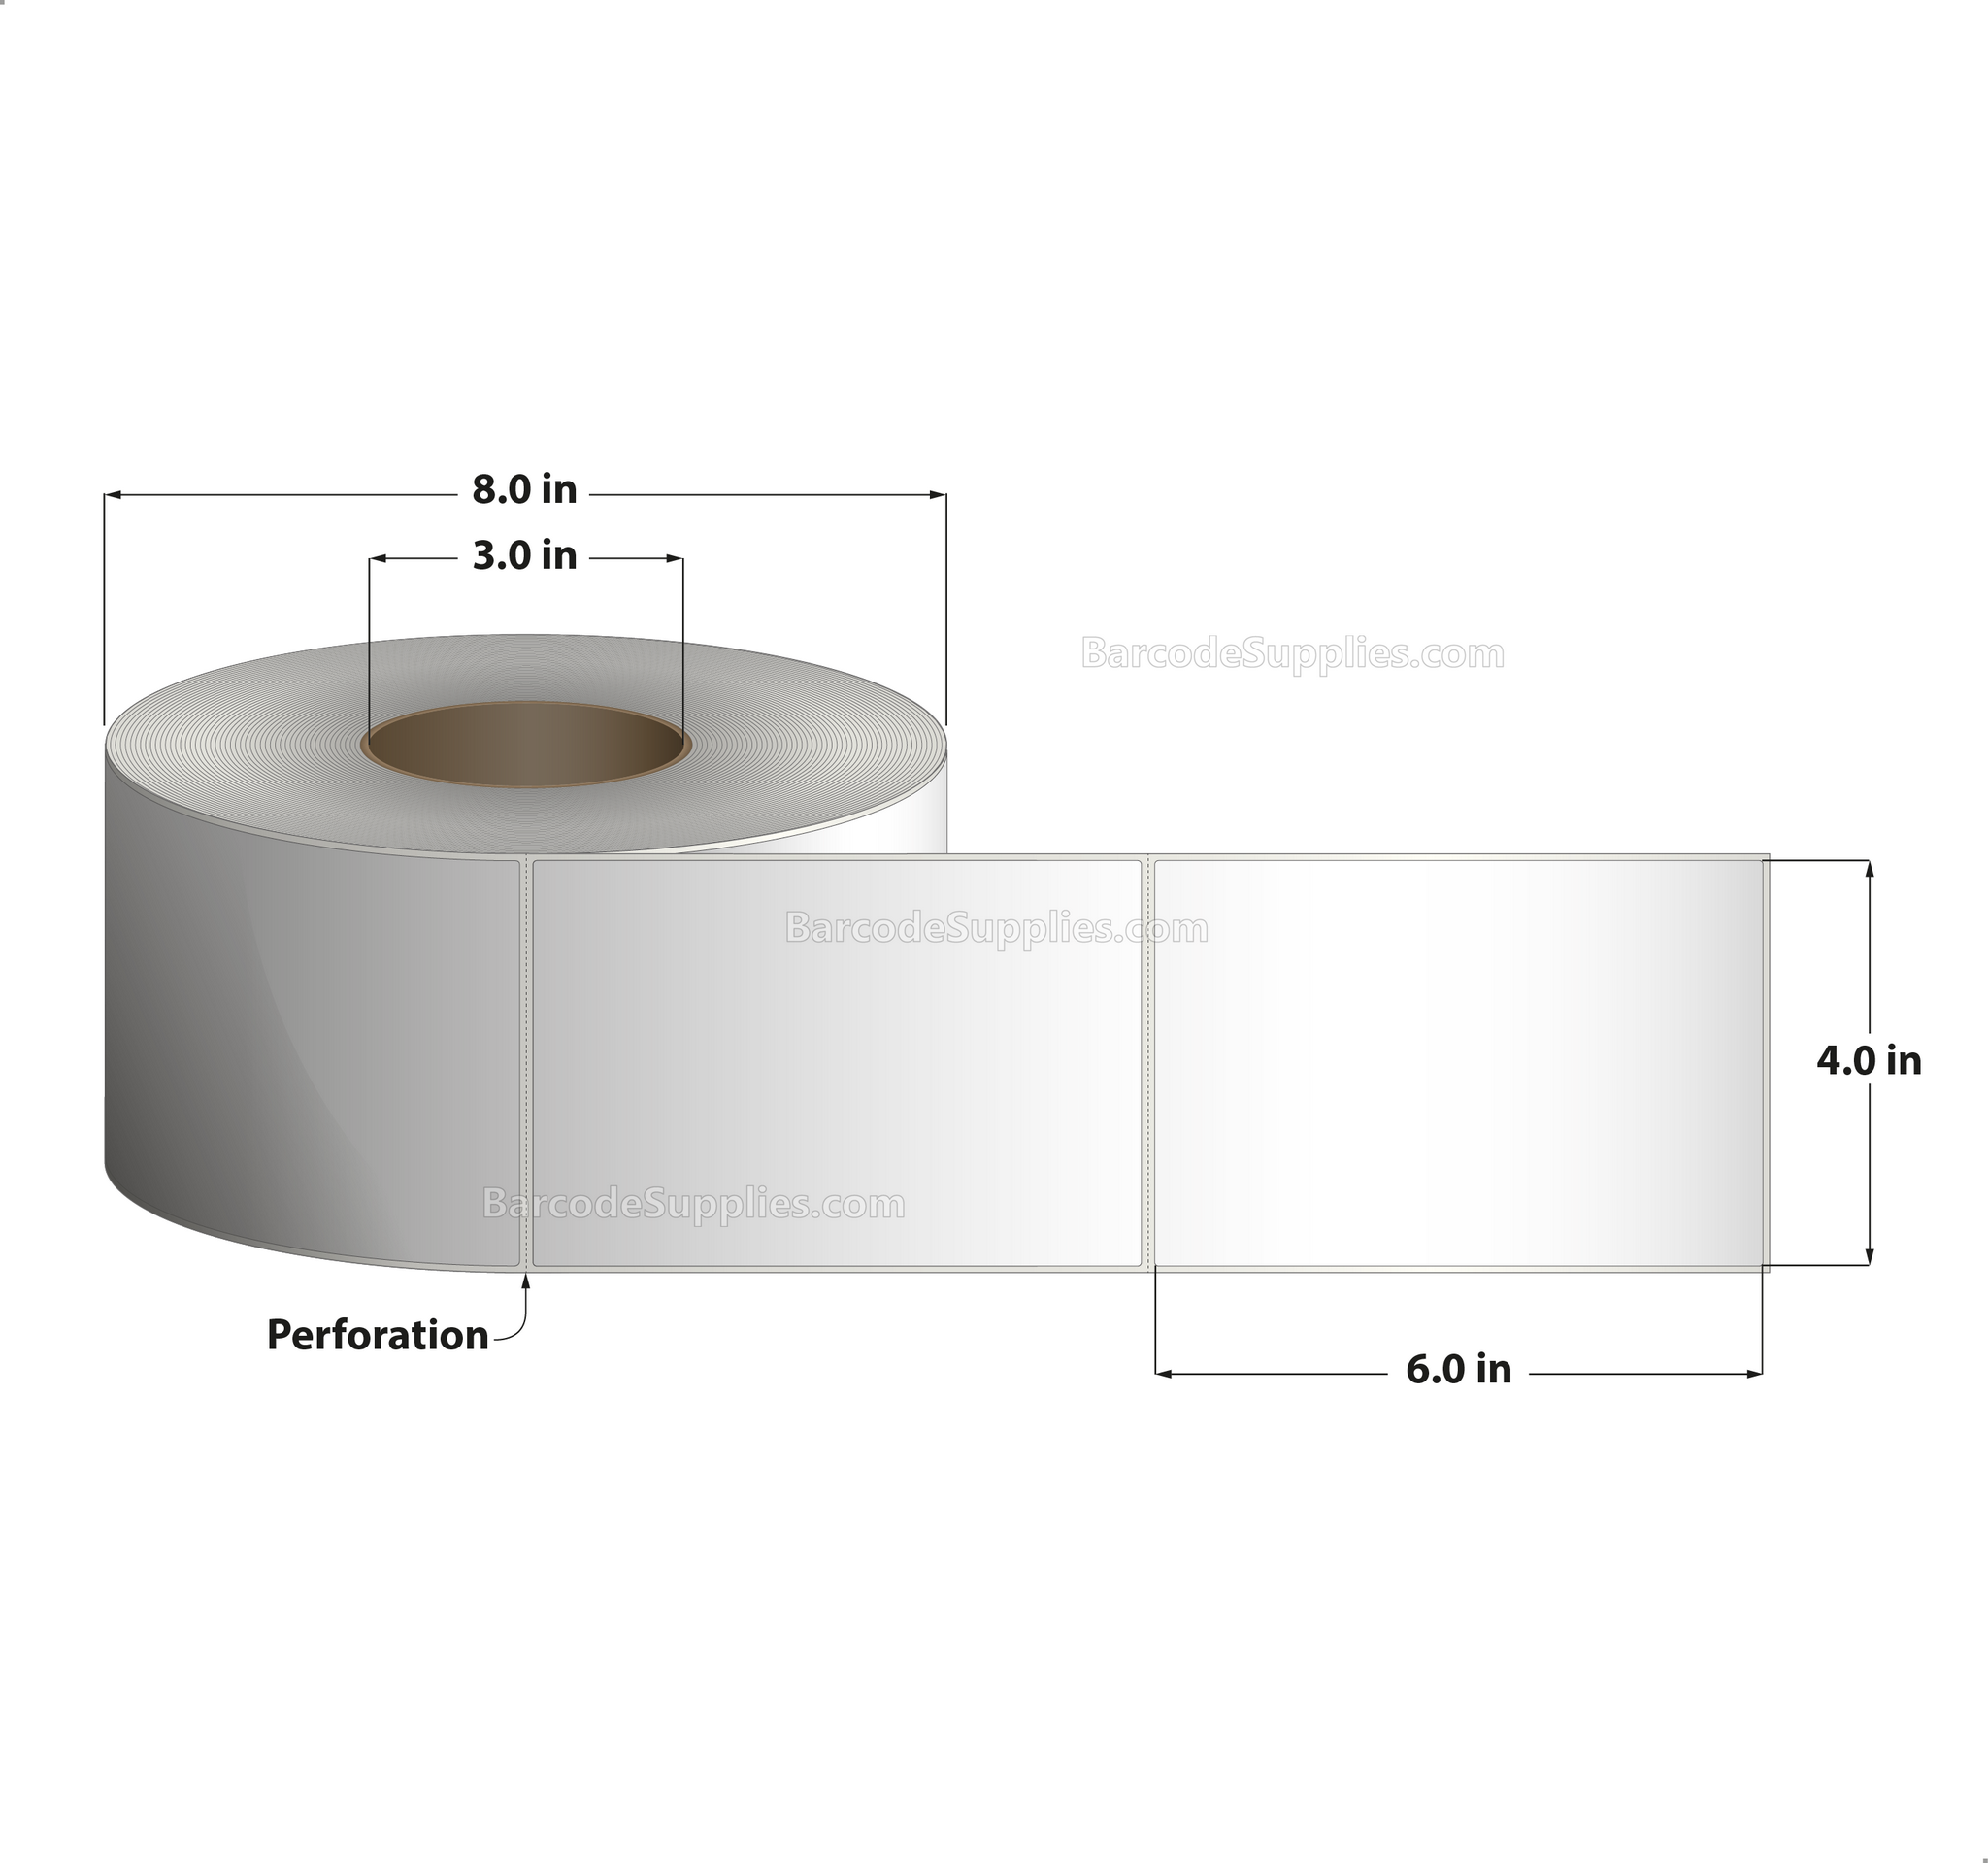 4 x 6 Thermal Transfer White Labels With Permanent Adhesive - Perforated - 1000 Labels Per Roll - Carton Of 4 Rolls - 4000 Labels Total - MPN: RT-4-6-1000-3